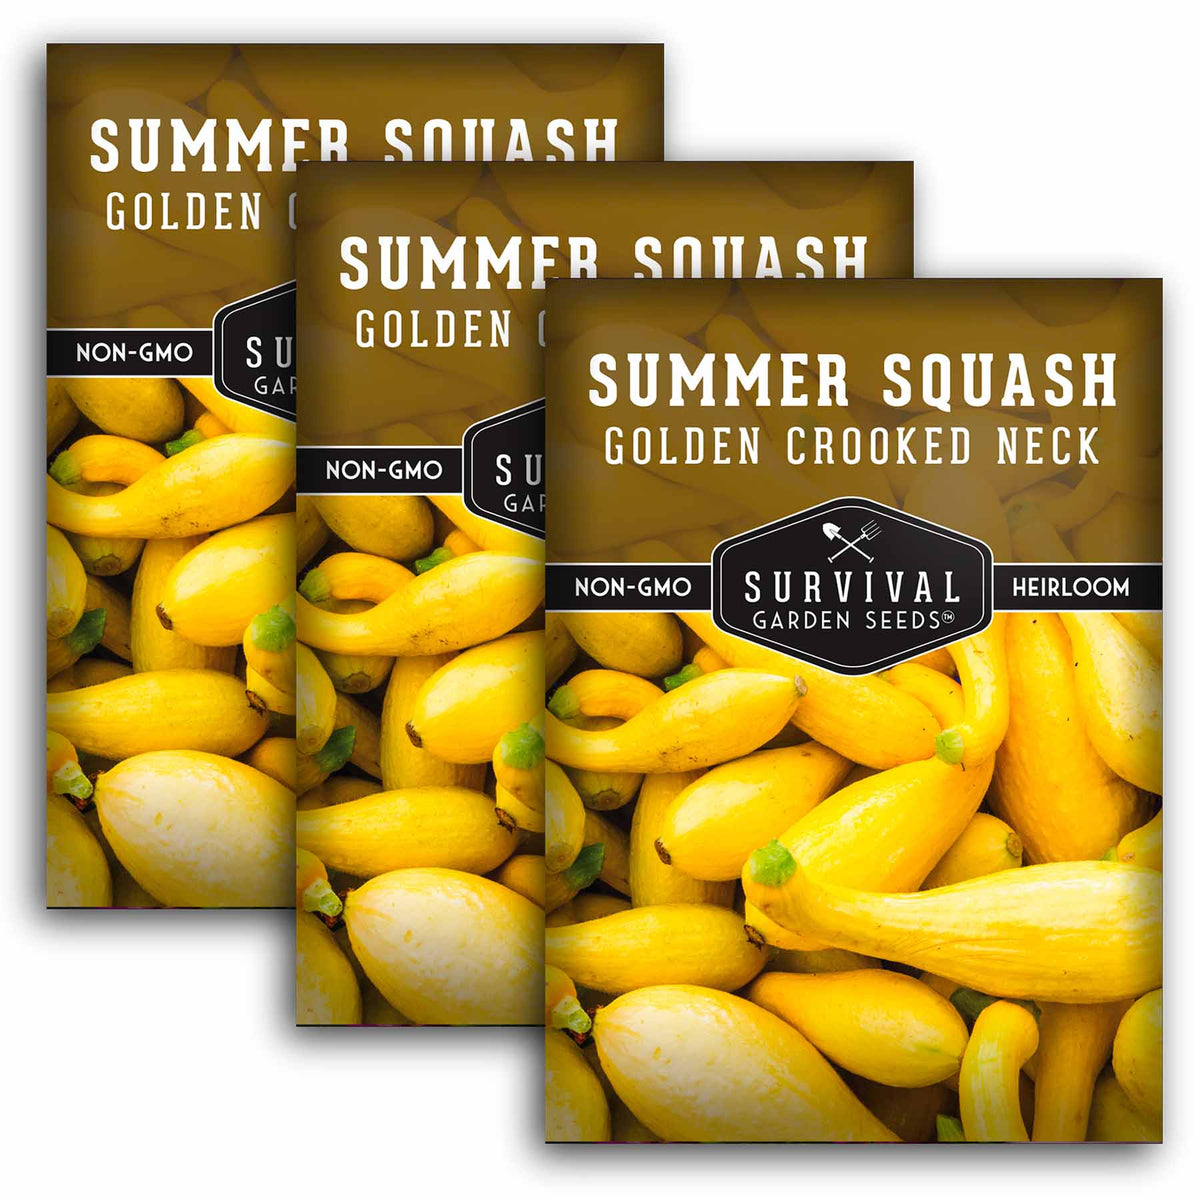 3 packets of Crooked Neck Squash seeds